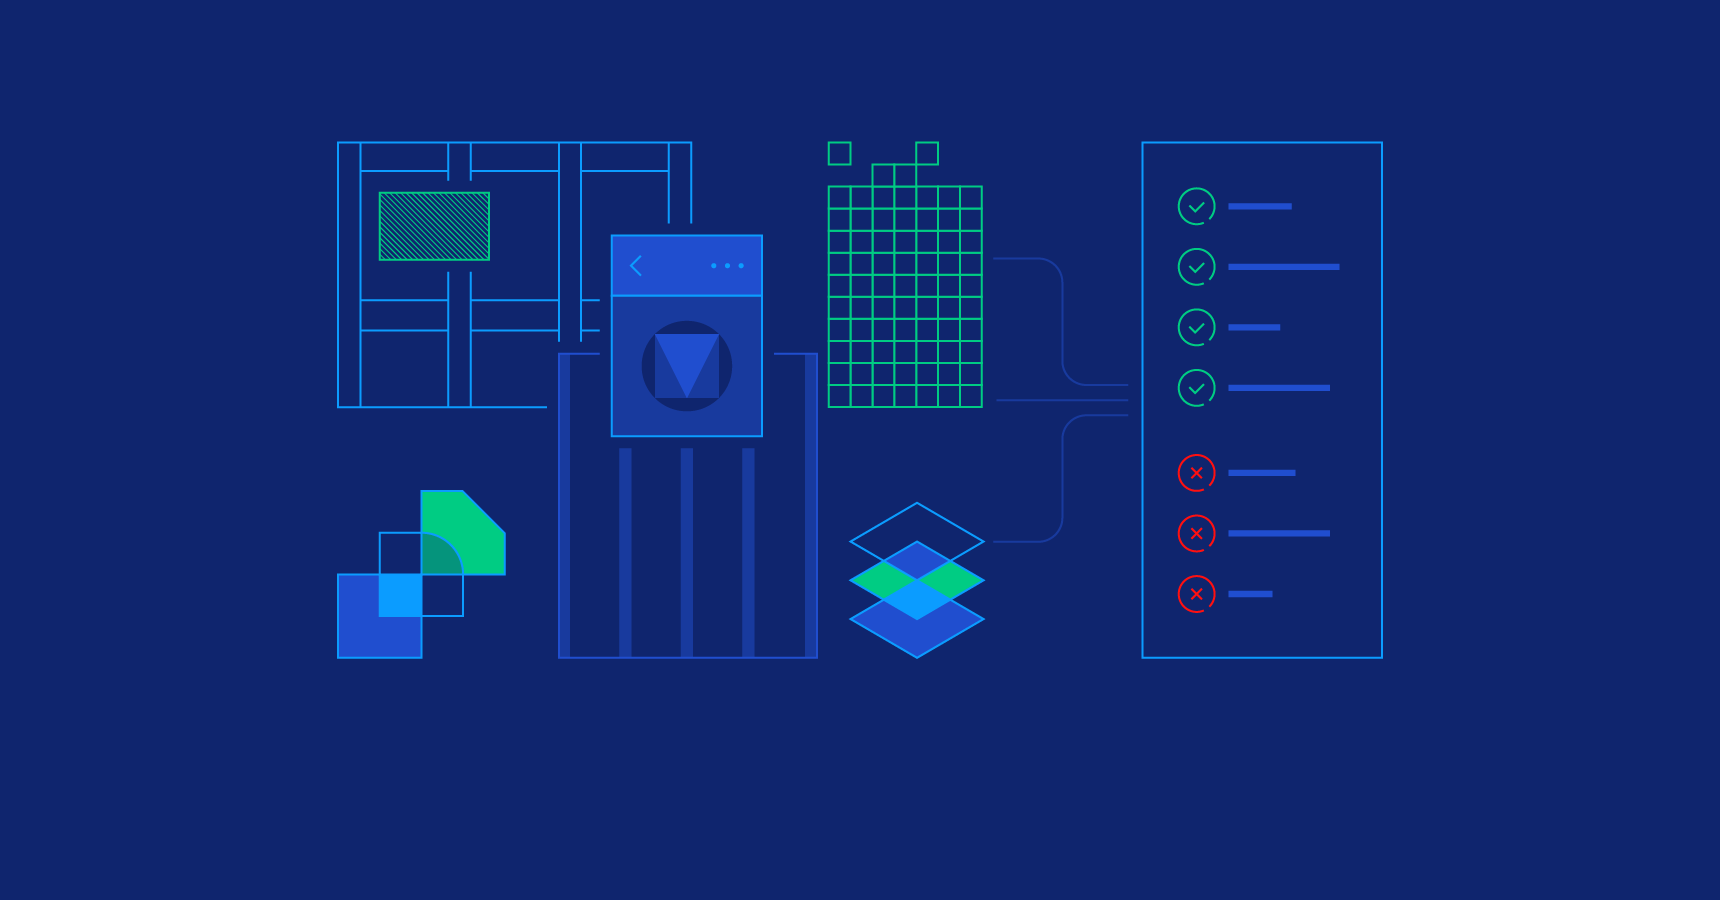 Why Use Material Design? Weighing the Pros and Cons